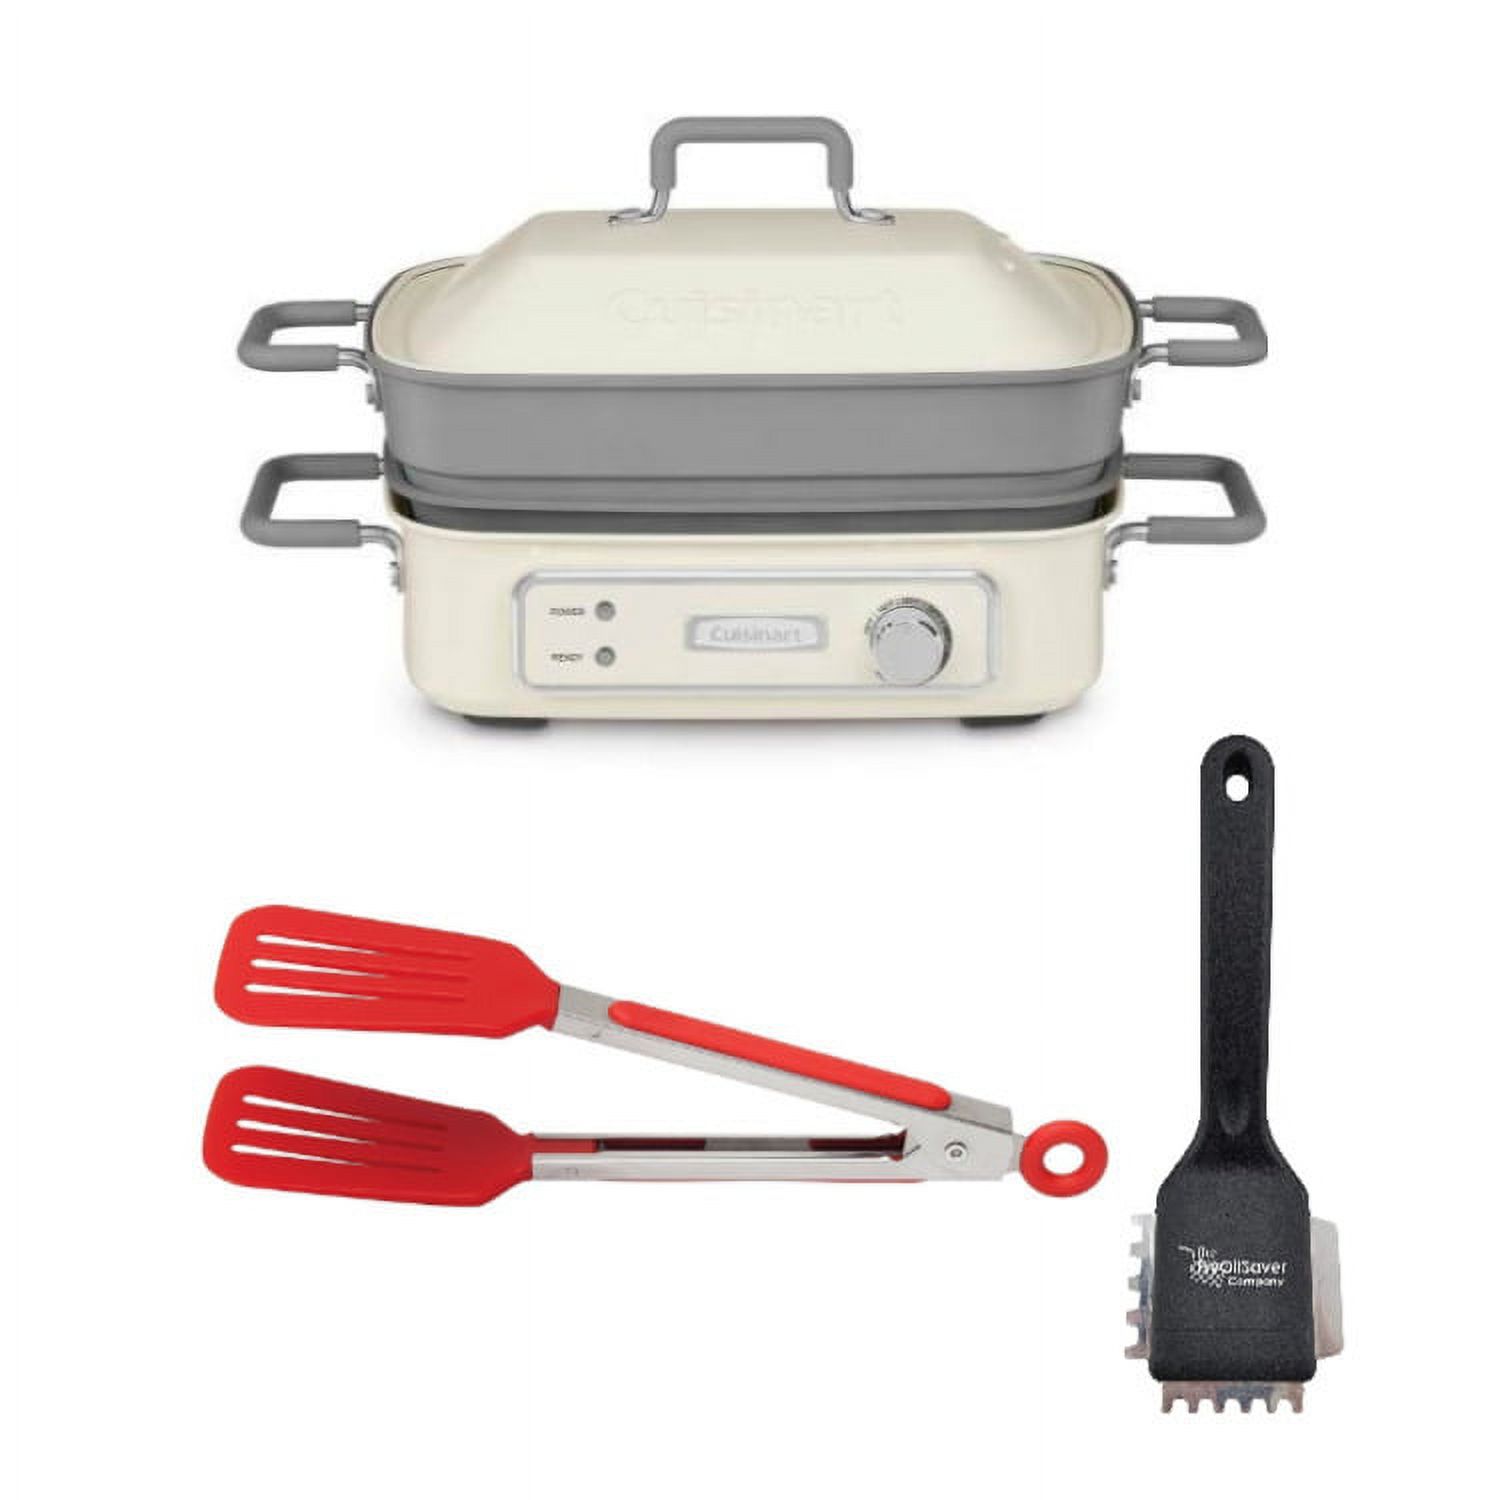 Cuisinart GR-M3 STACK5 Multi-Functional Grill w/ Small Grill Brush Bundle - image 1 of 8